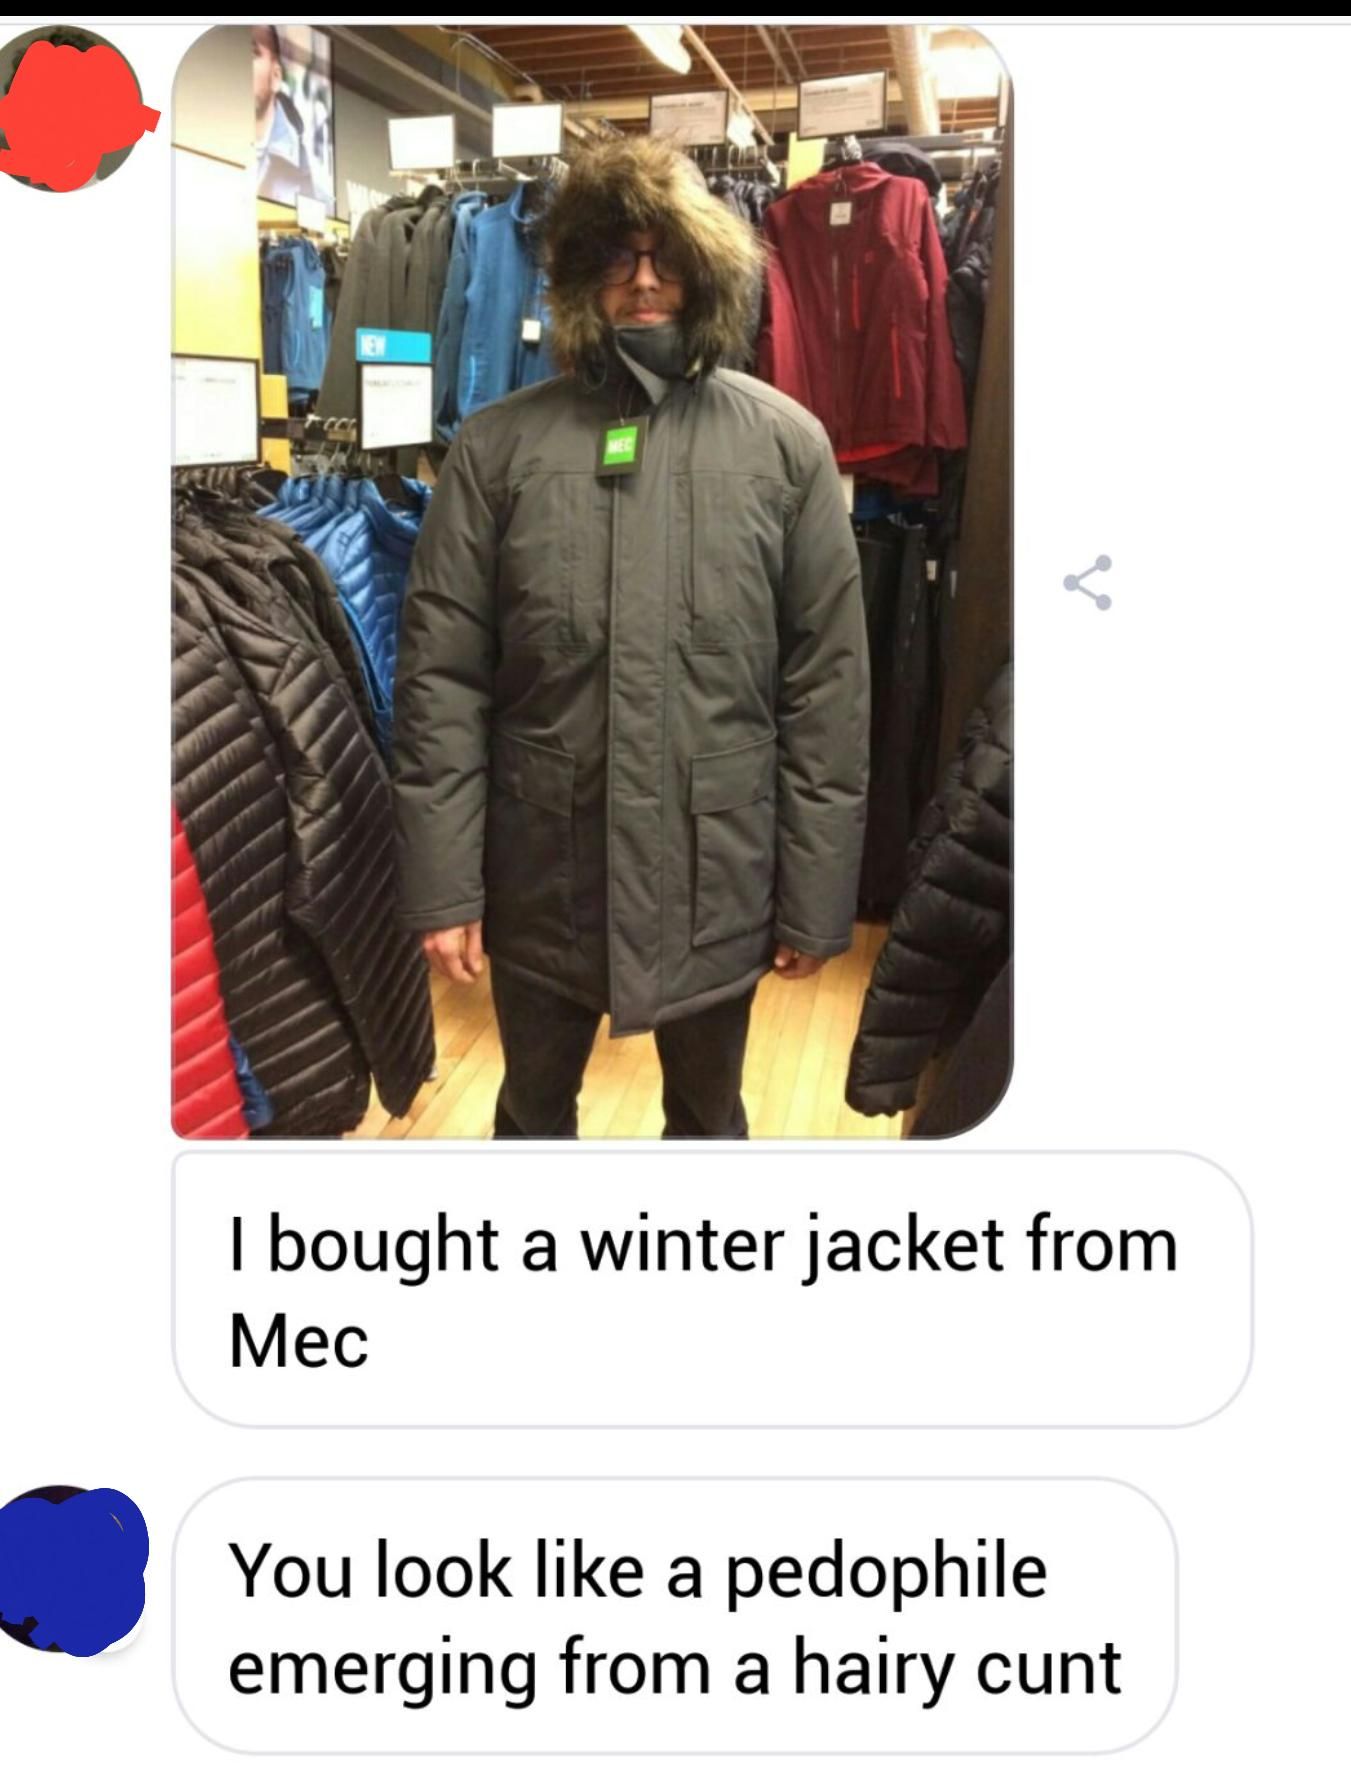 When you ask your friends what they think of your jacket...